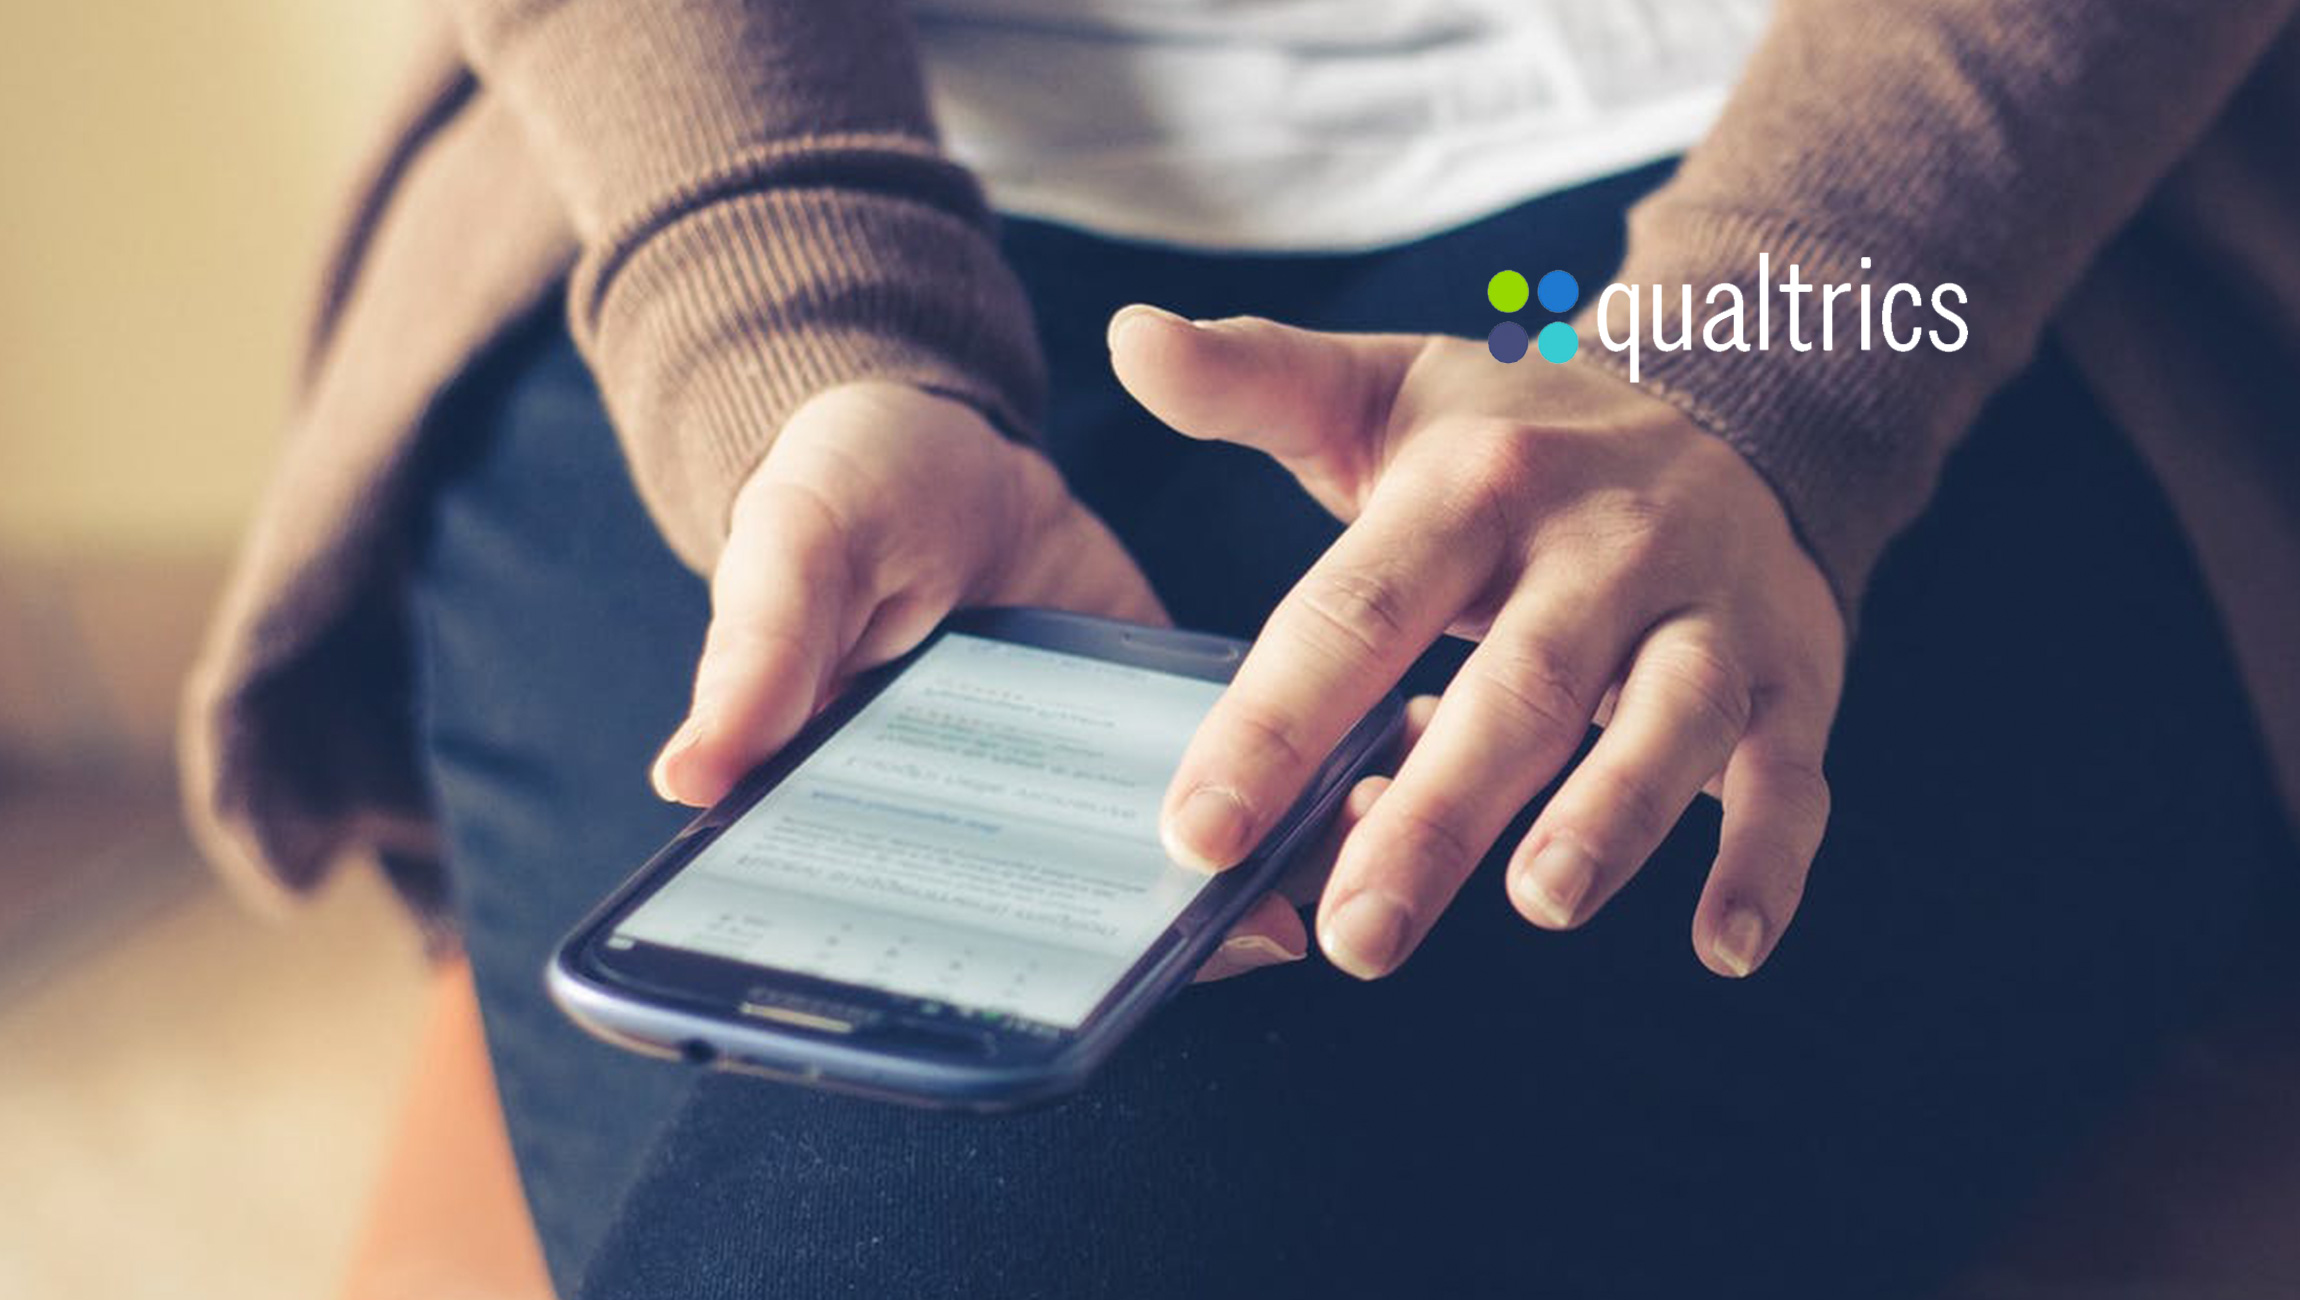 Qualtrics Introduces Mobile In-App Software Development Kit for Leading Customer Experience Platform